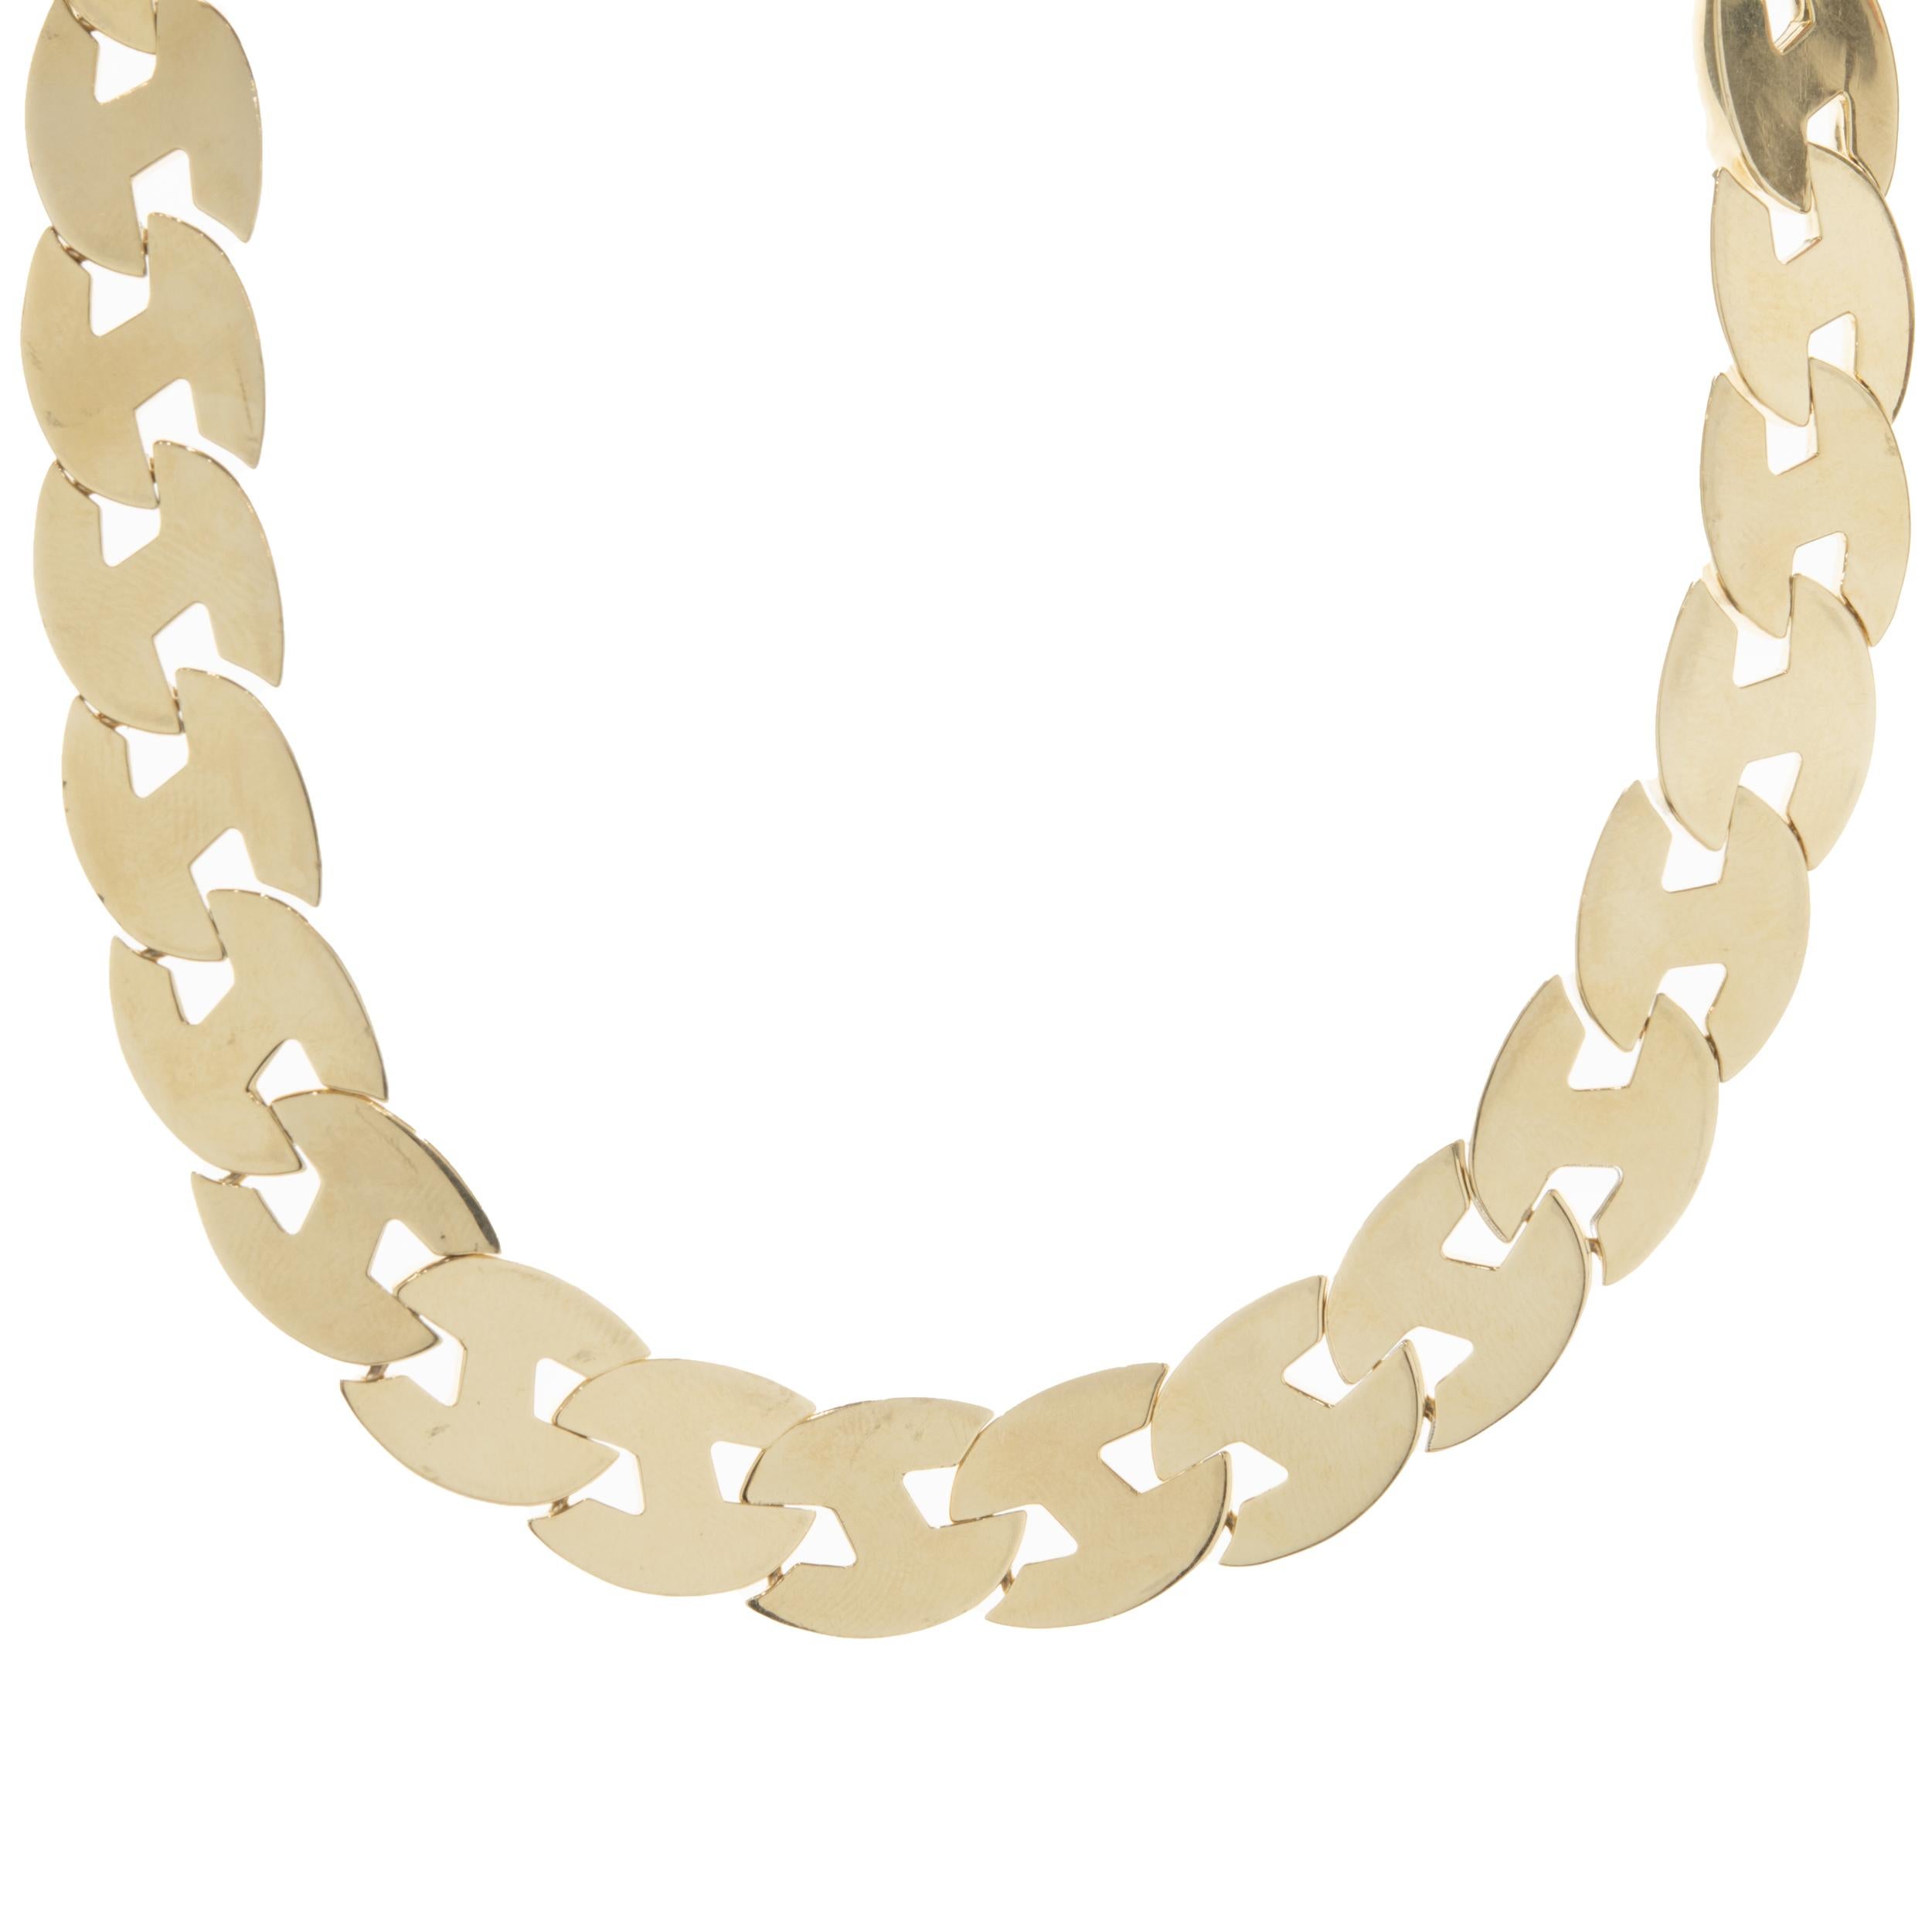 Designer: custom
Material: 14K yellow gold
Dimensions: necklace measures 16-inches in length
Weight: 49.53 grams
